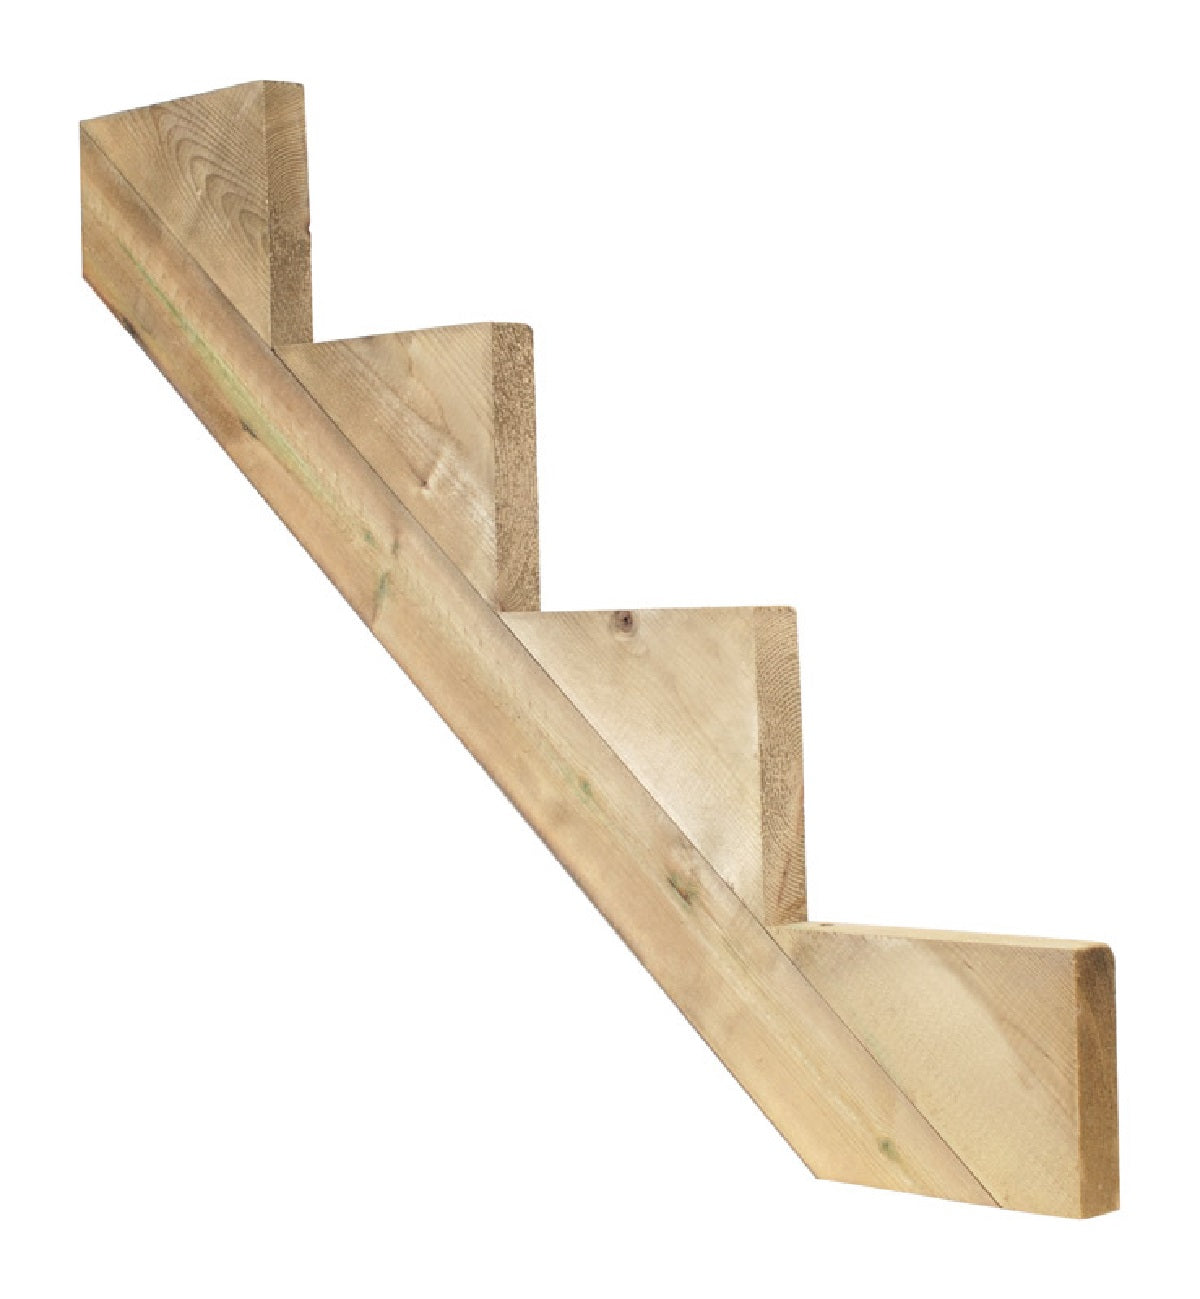 Buy rona stair treads - Online store for household products, stair treads in USA, on sale, low price, discount deals, coupon code